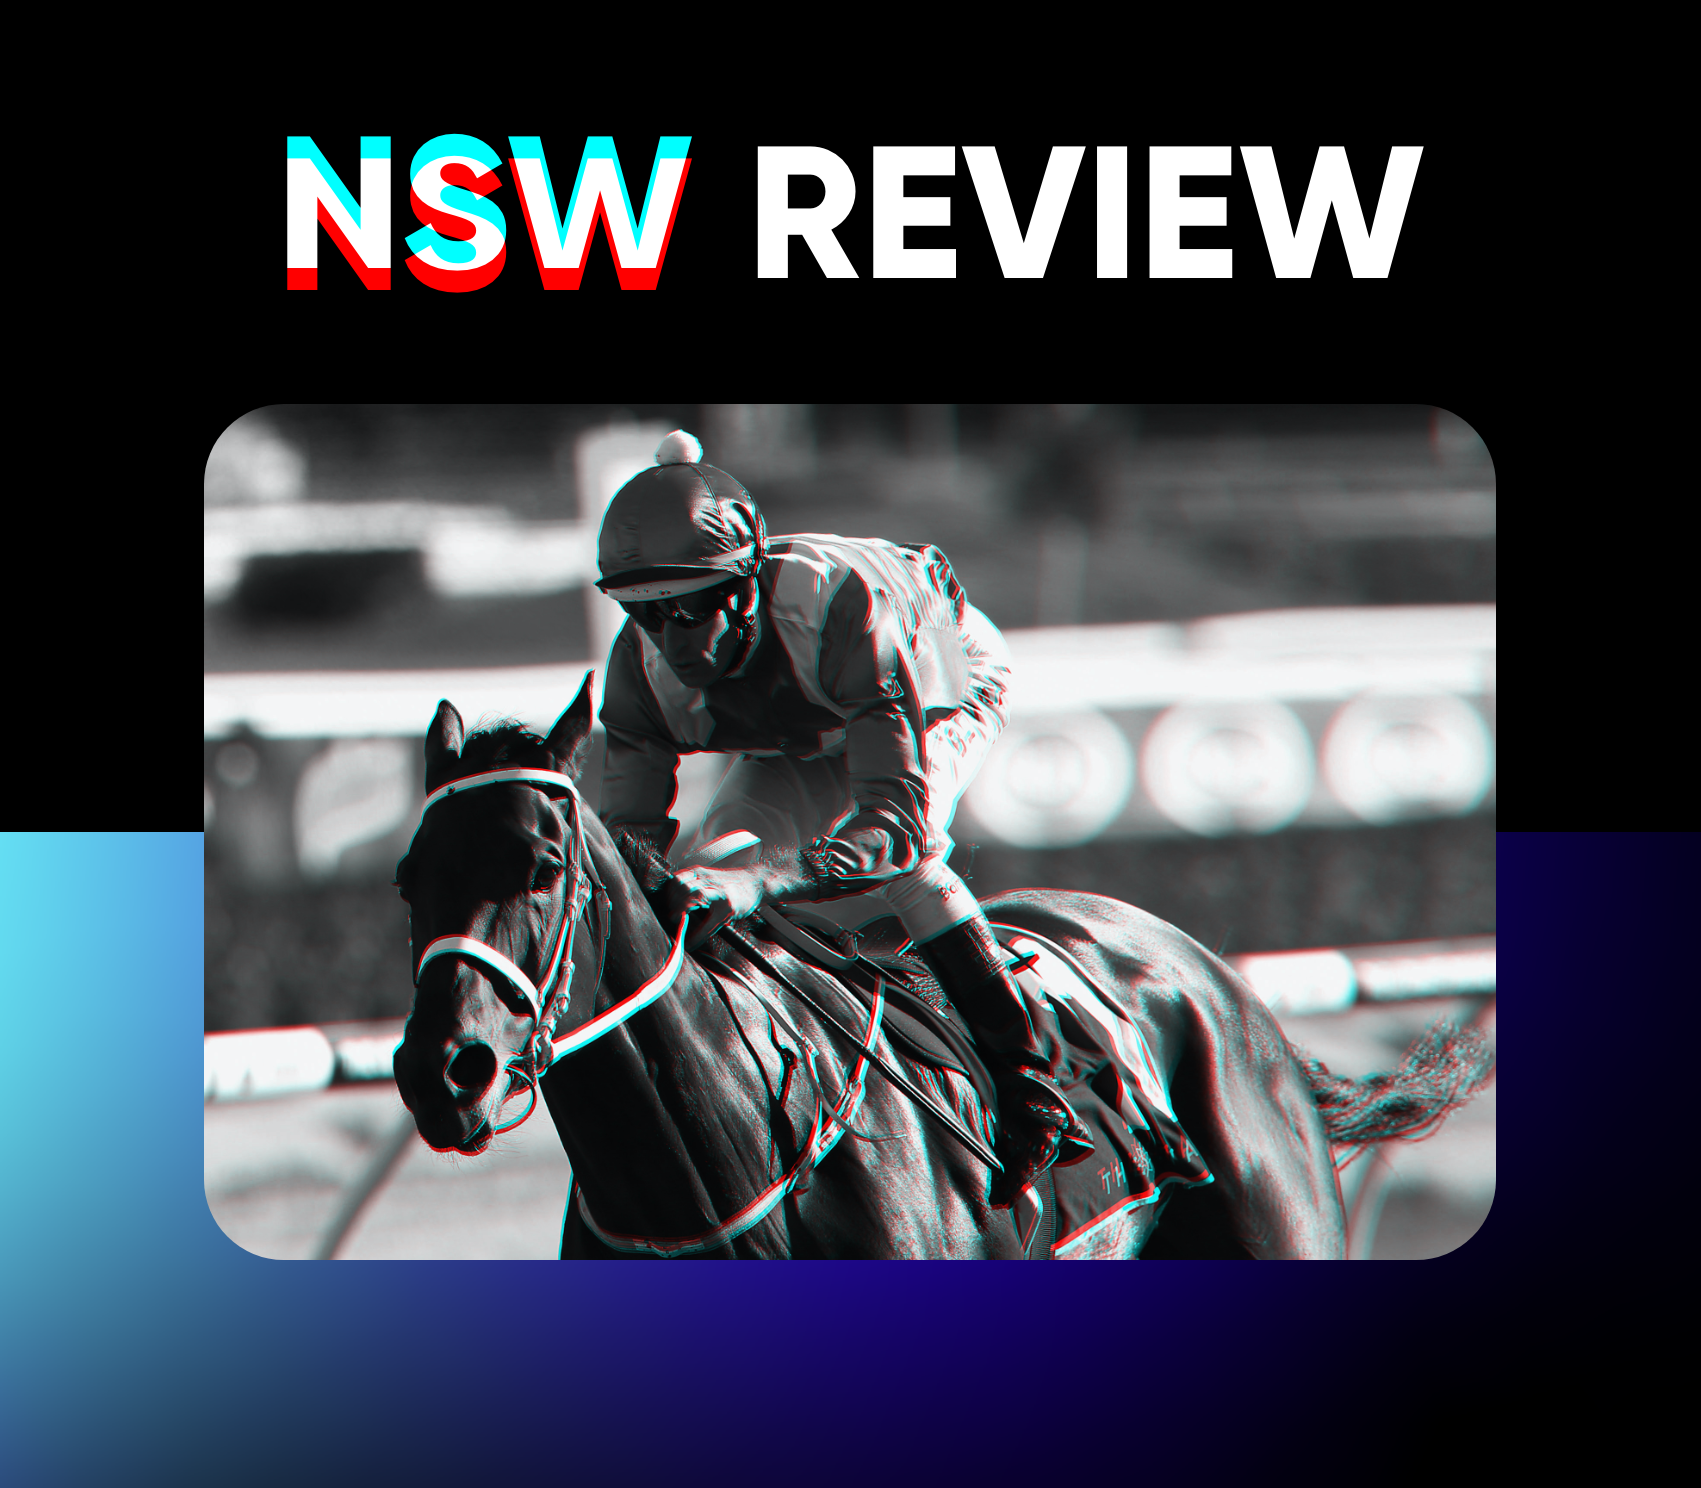 The Sydney Review | 19th March, 2022